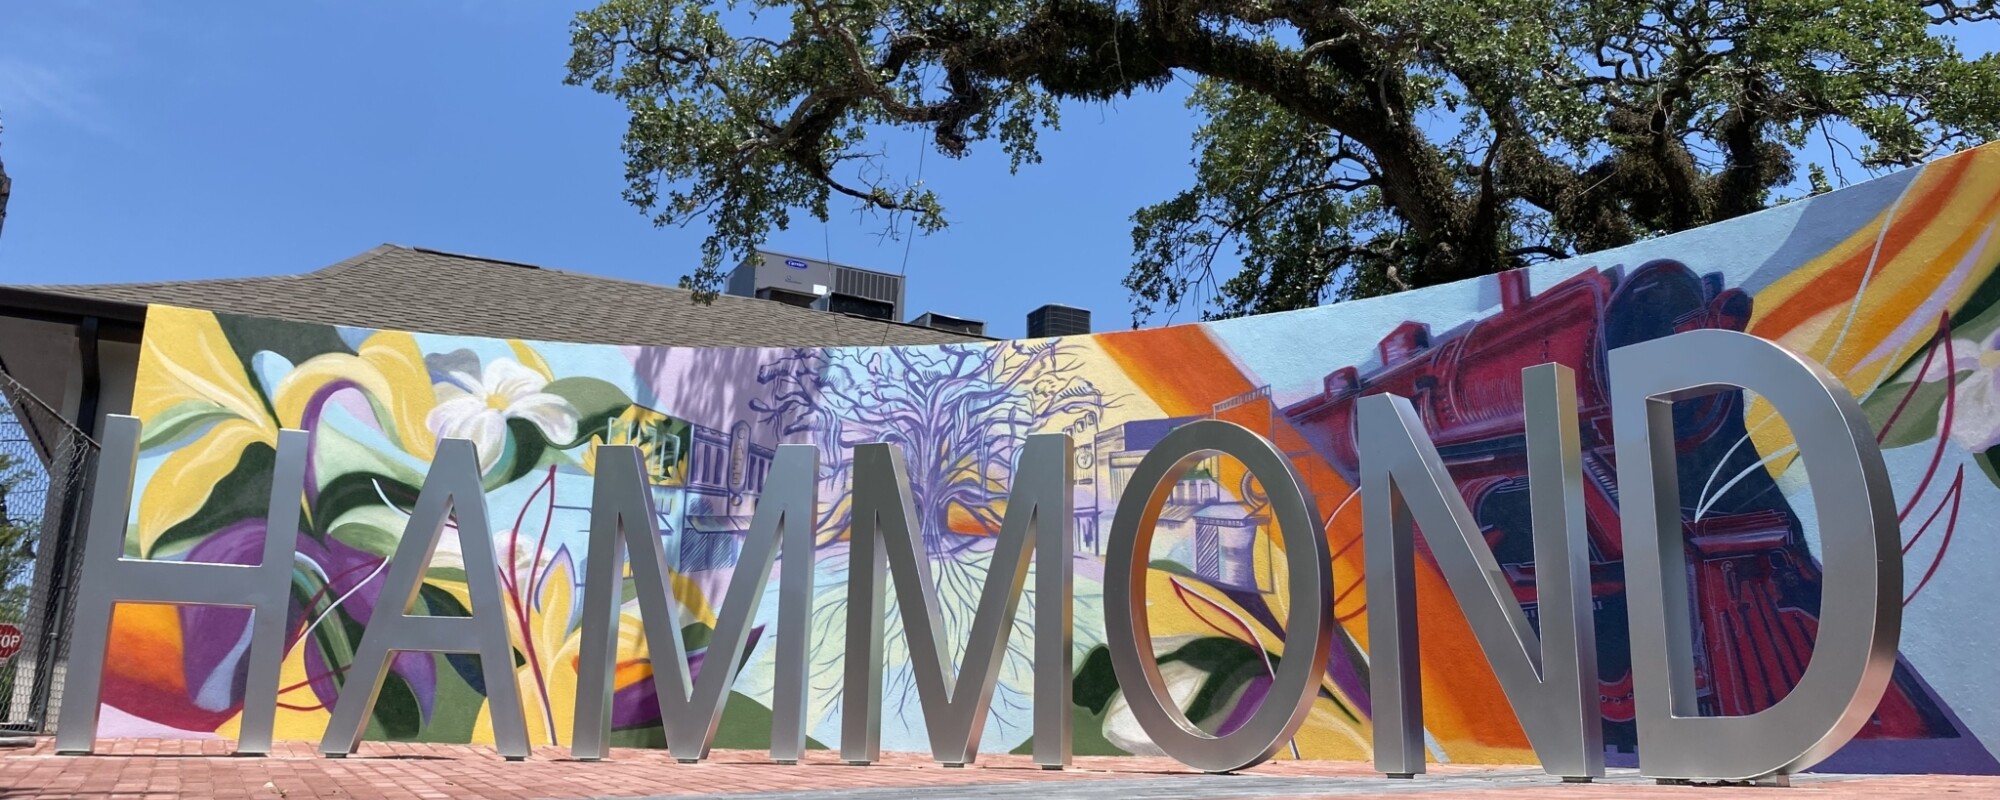 Free-standing letters spell "HAMMOND" in front of a curved wall that is decorated with a brightly colored mural